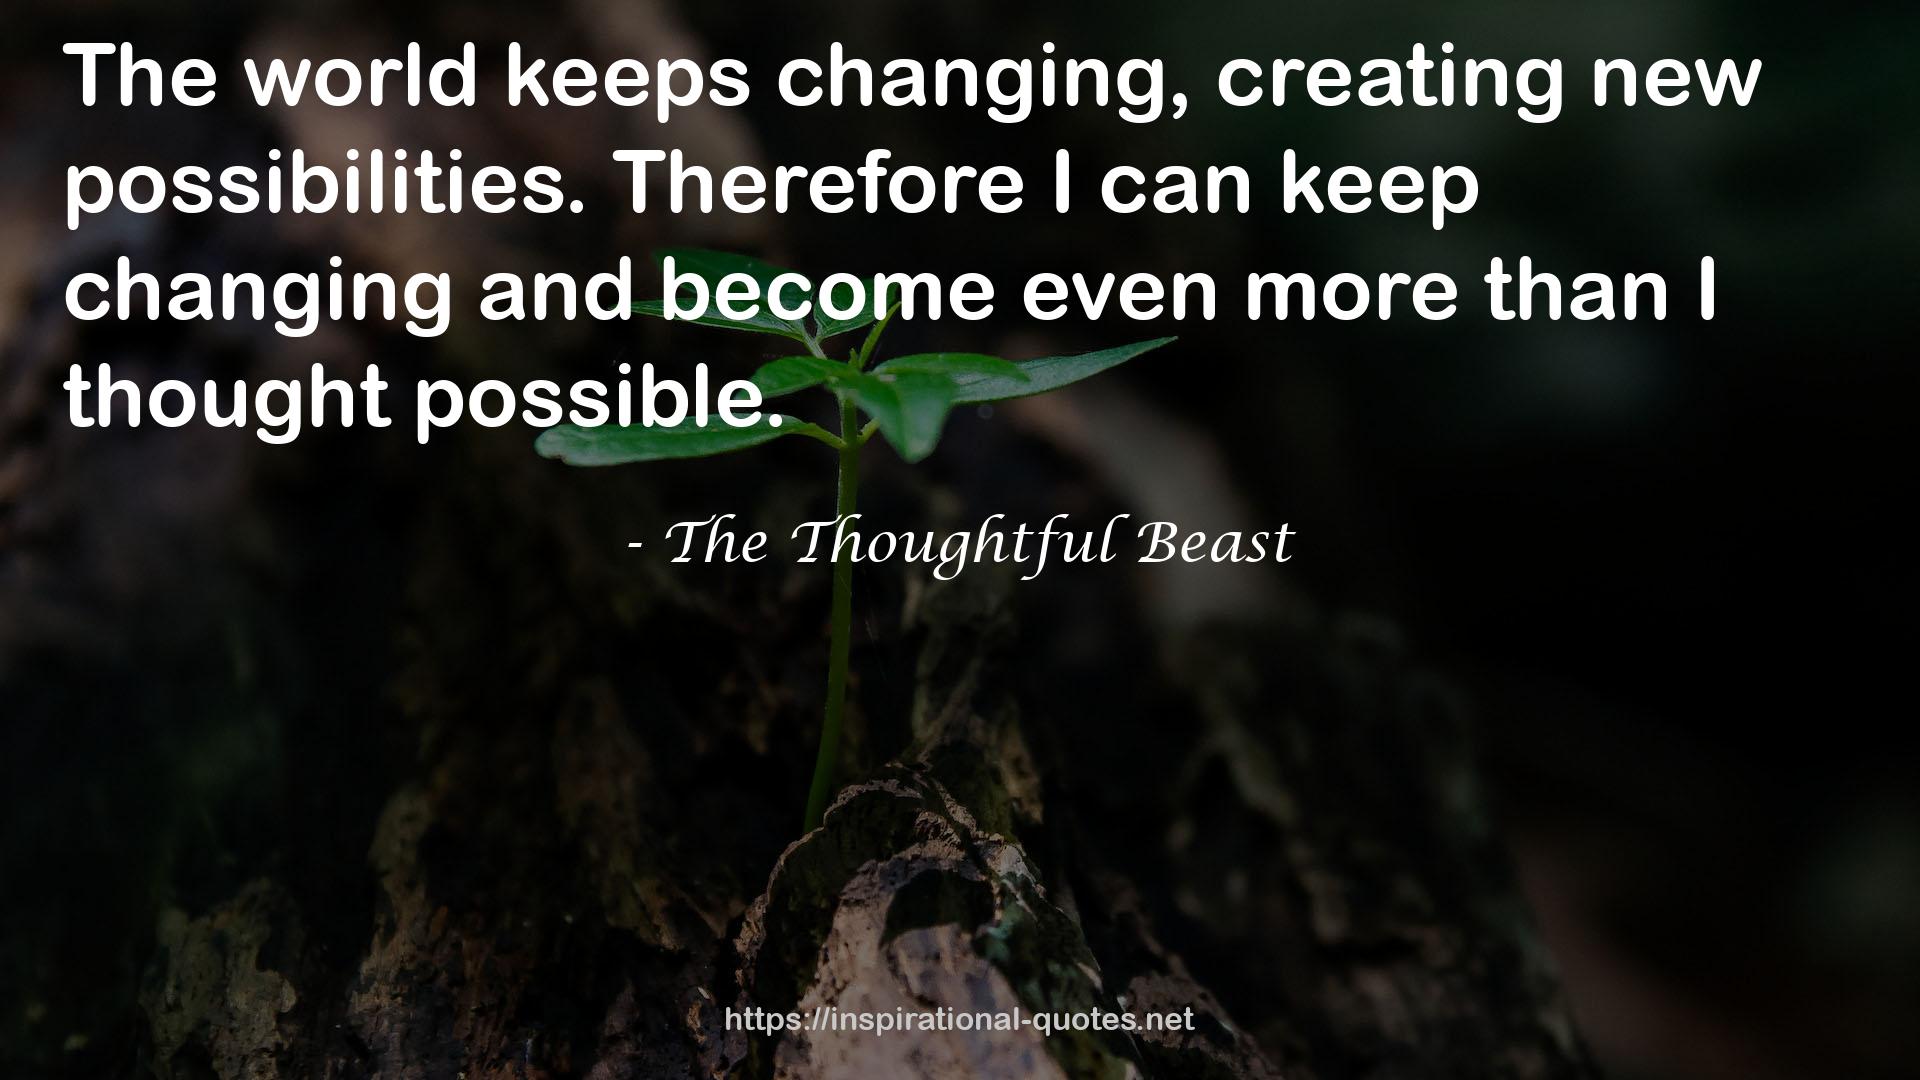 The Thoughtful Beast QUOTES